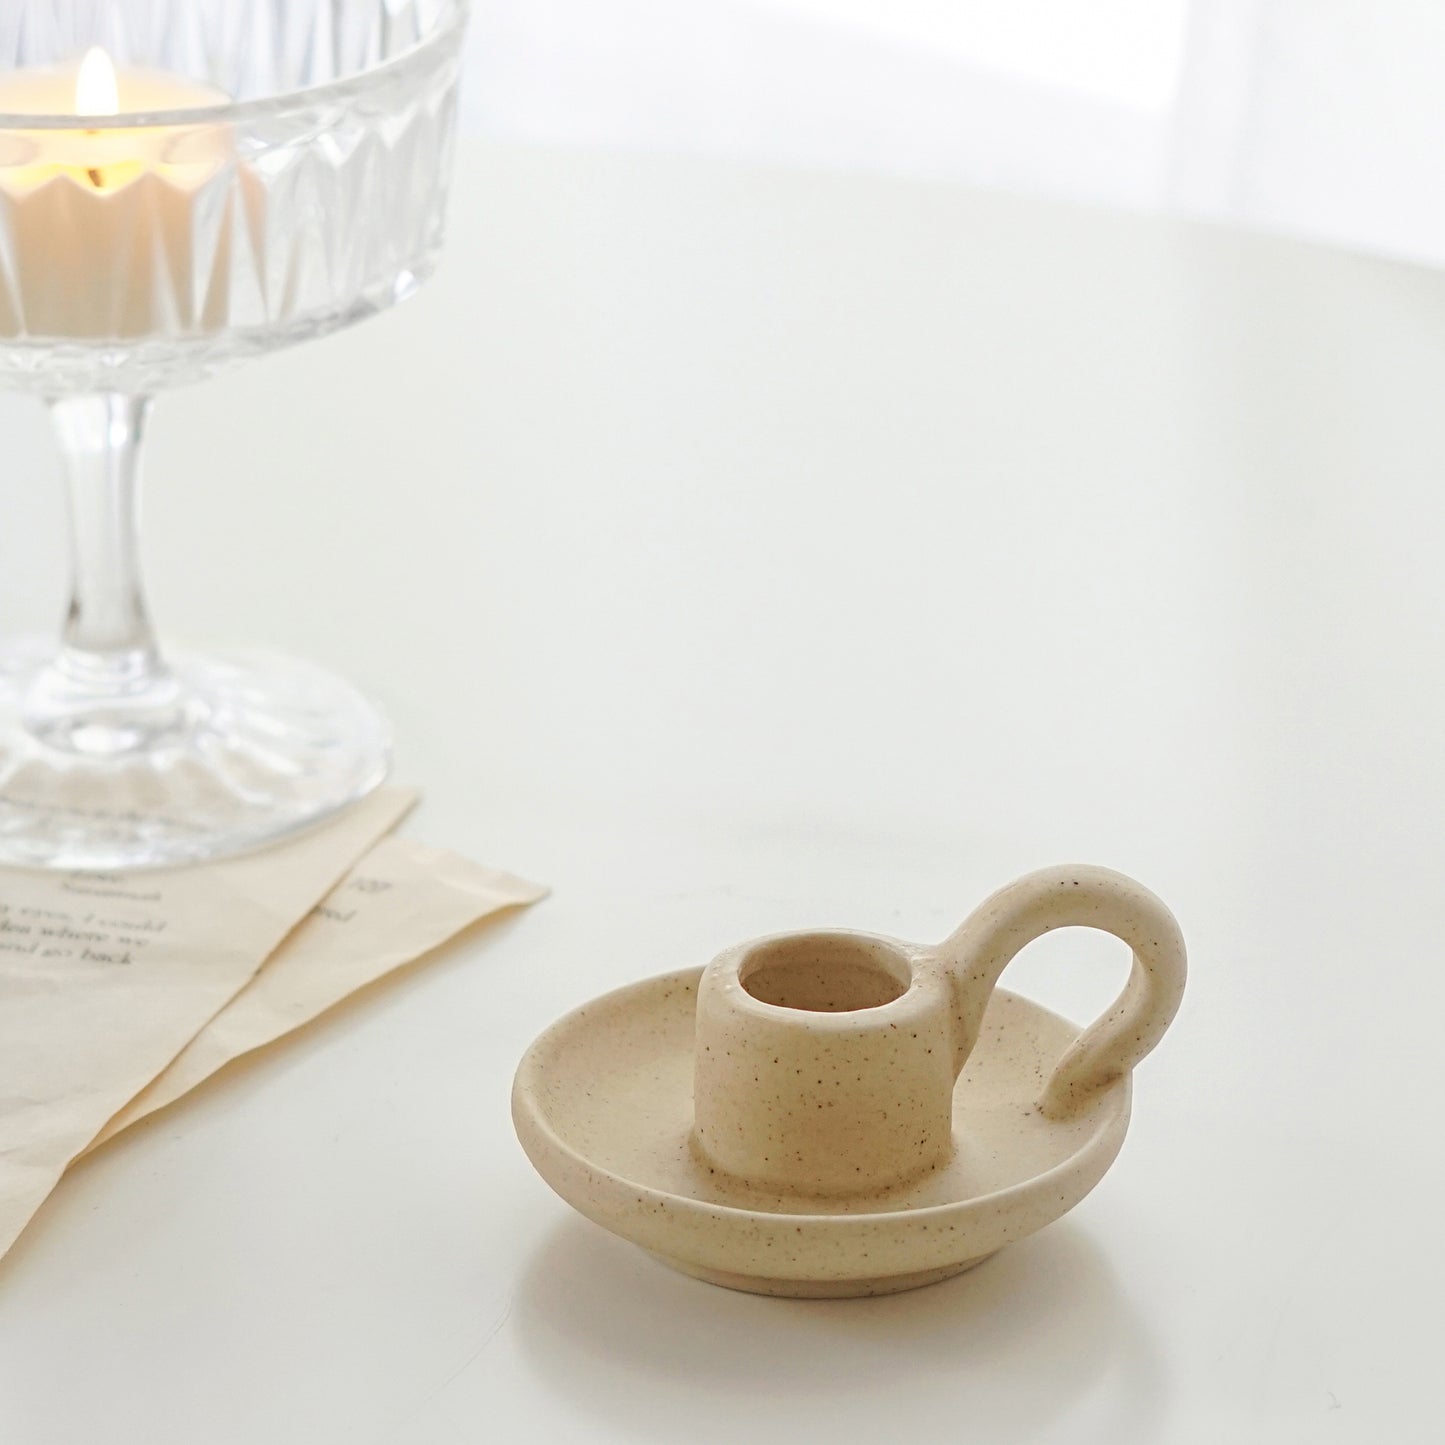 a dotted neutral beige color ceramic taper candle holder and a lit tealight candle in a coupe glass placed on book pages on white round table